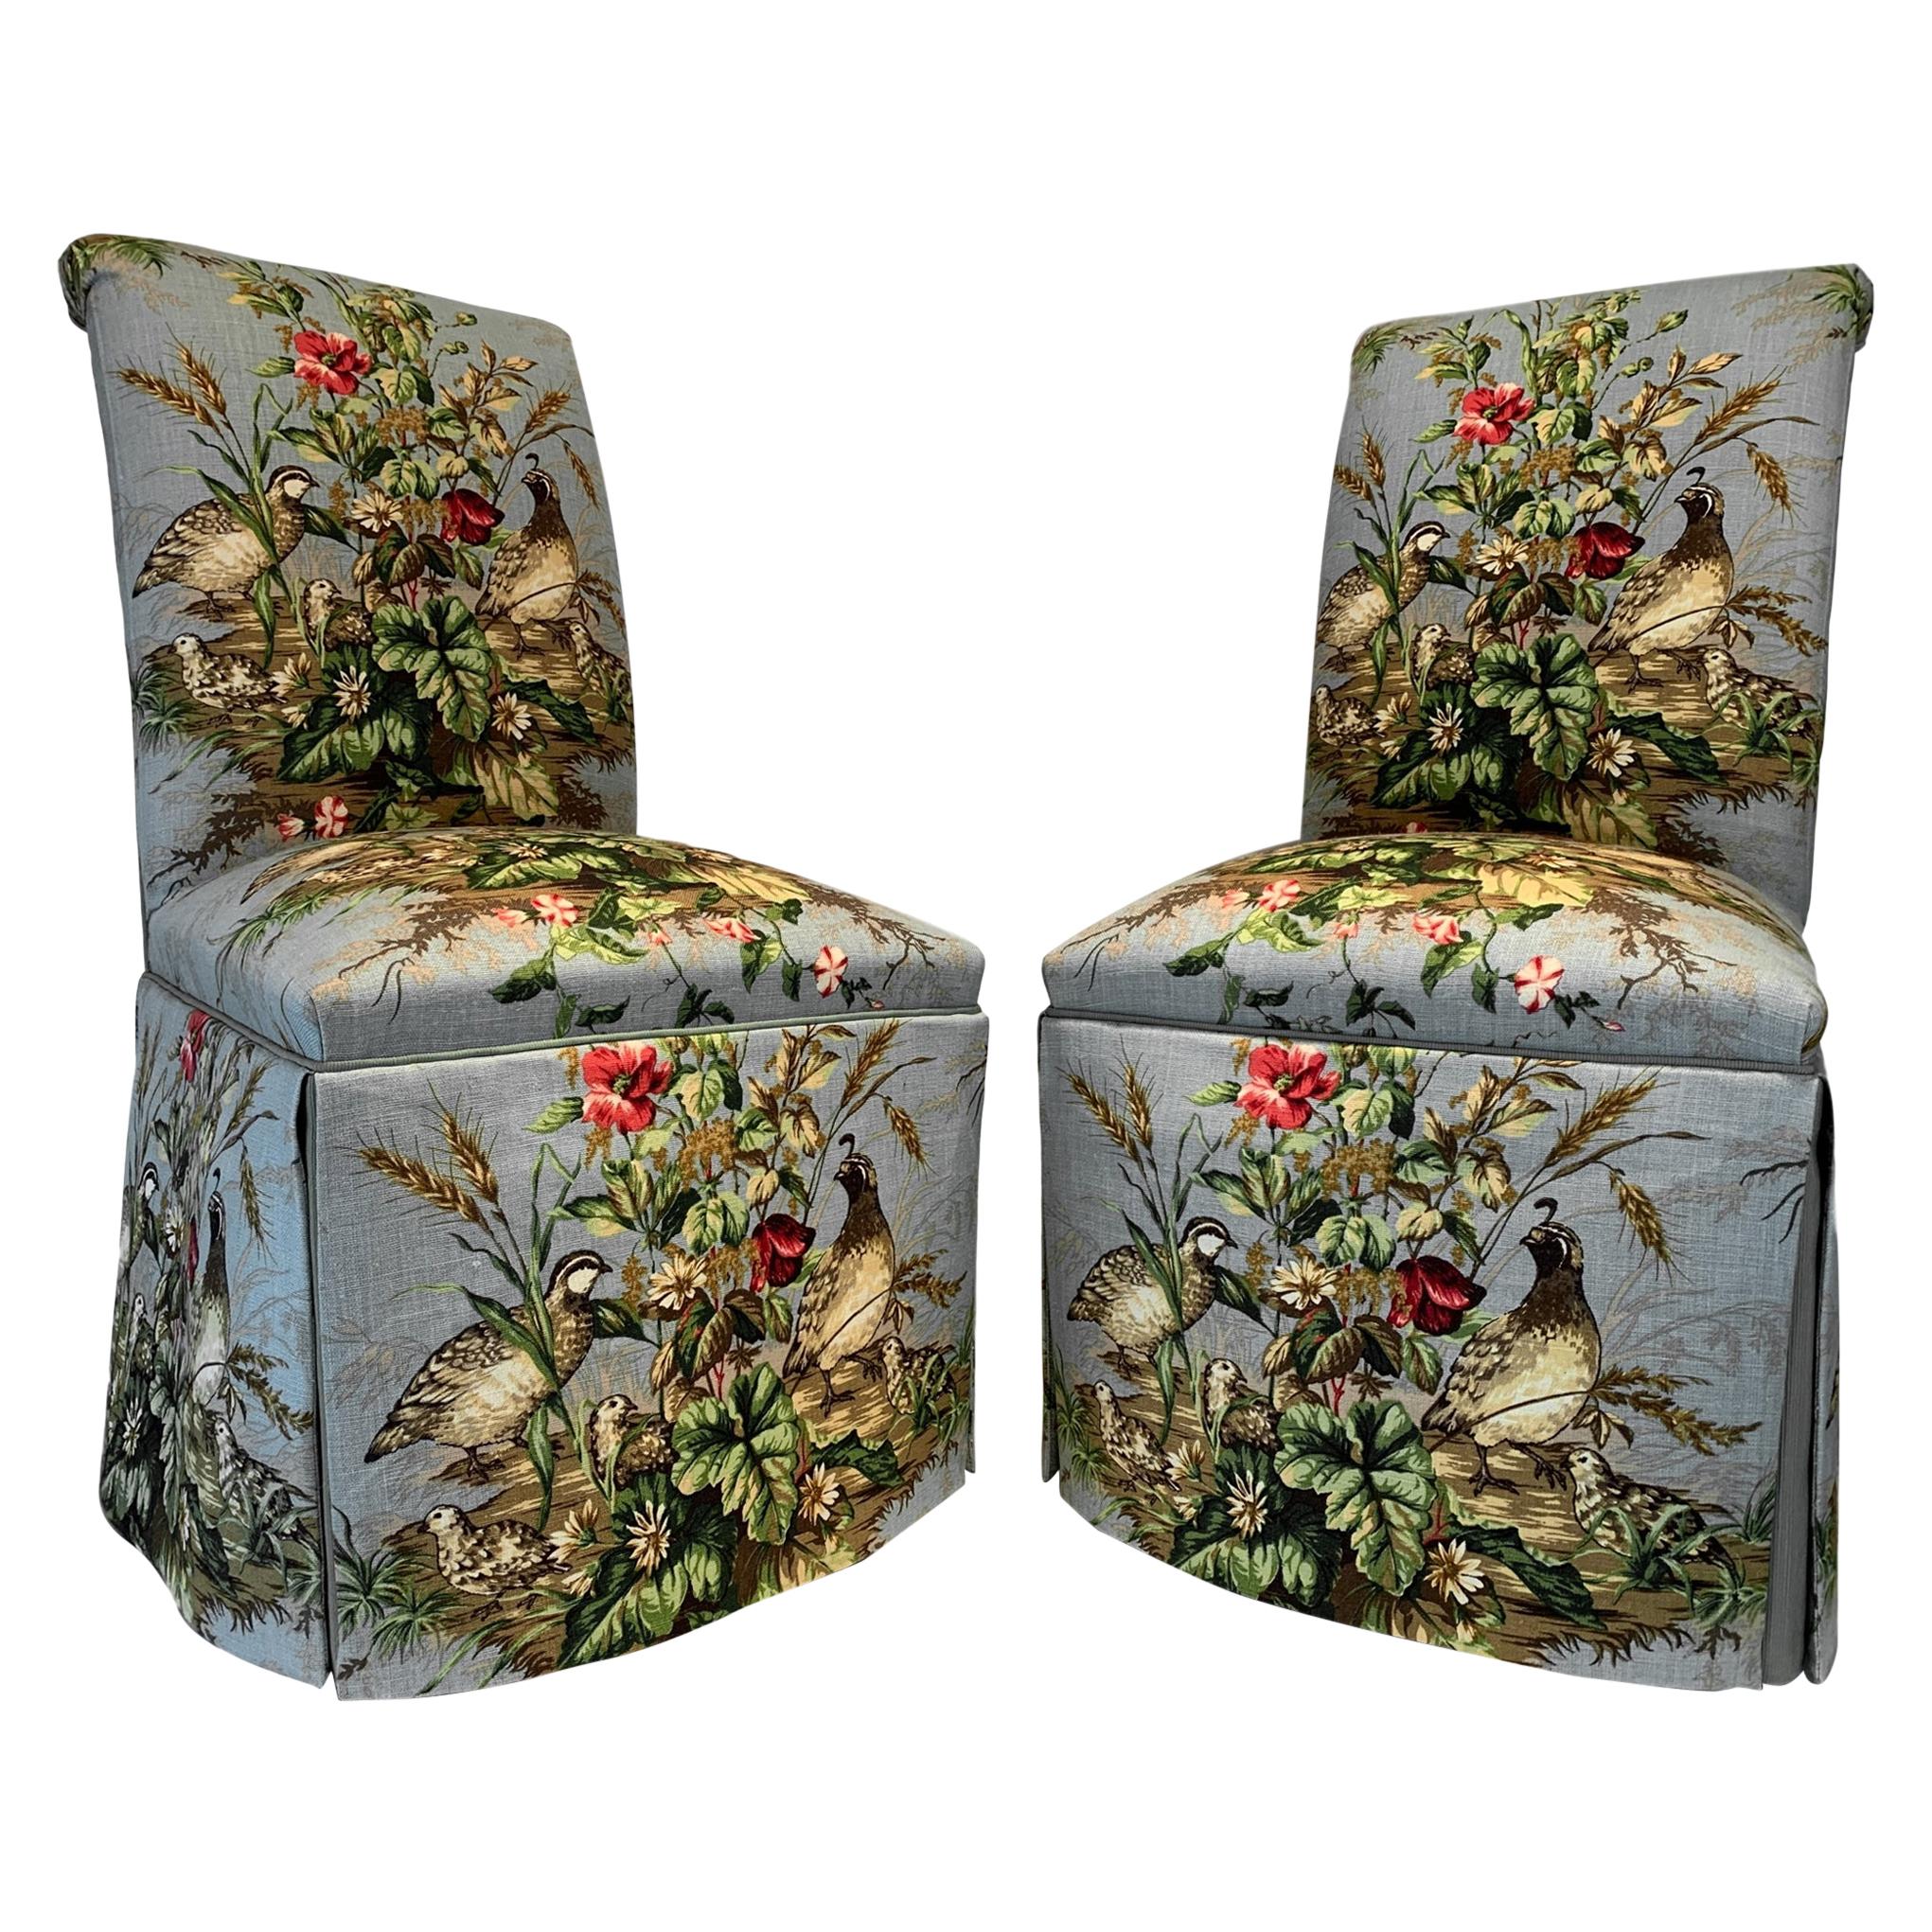 Pair of Parsons Chairs in Scalamandré Iconic Fabric 'Edwin's Covey' Brand-New